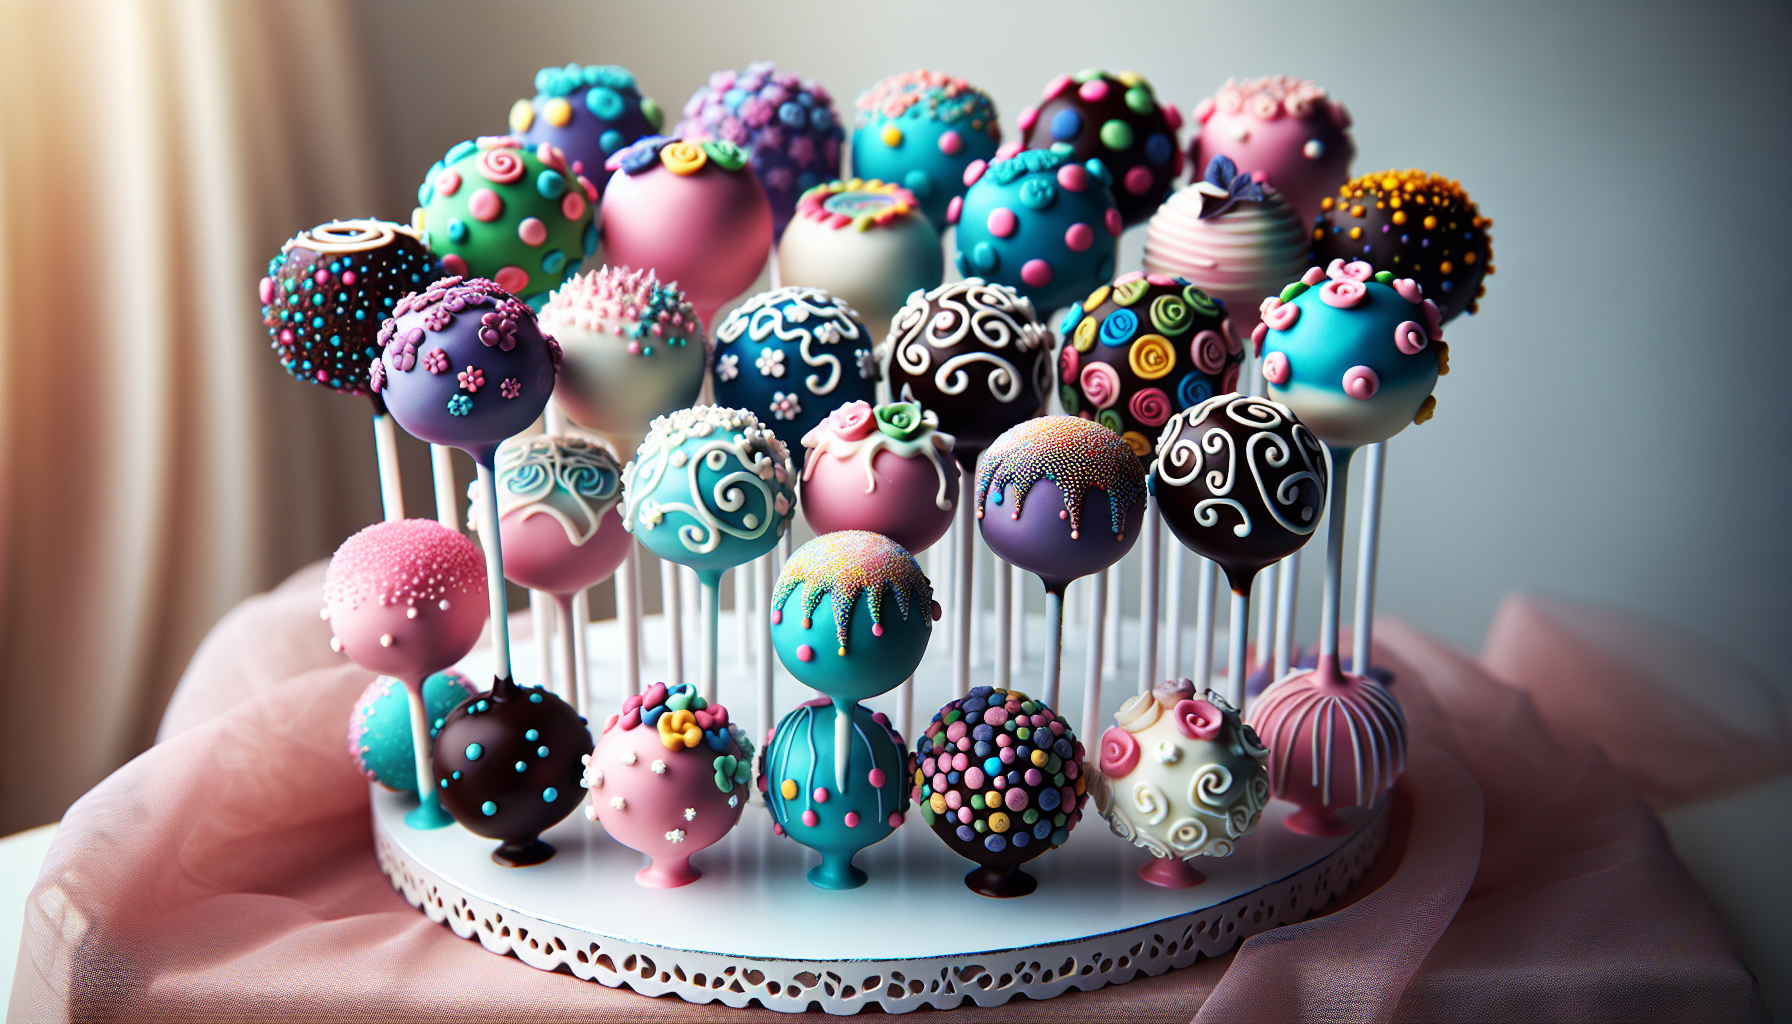 A variety of colorful cake pops on display